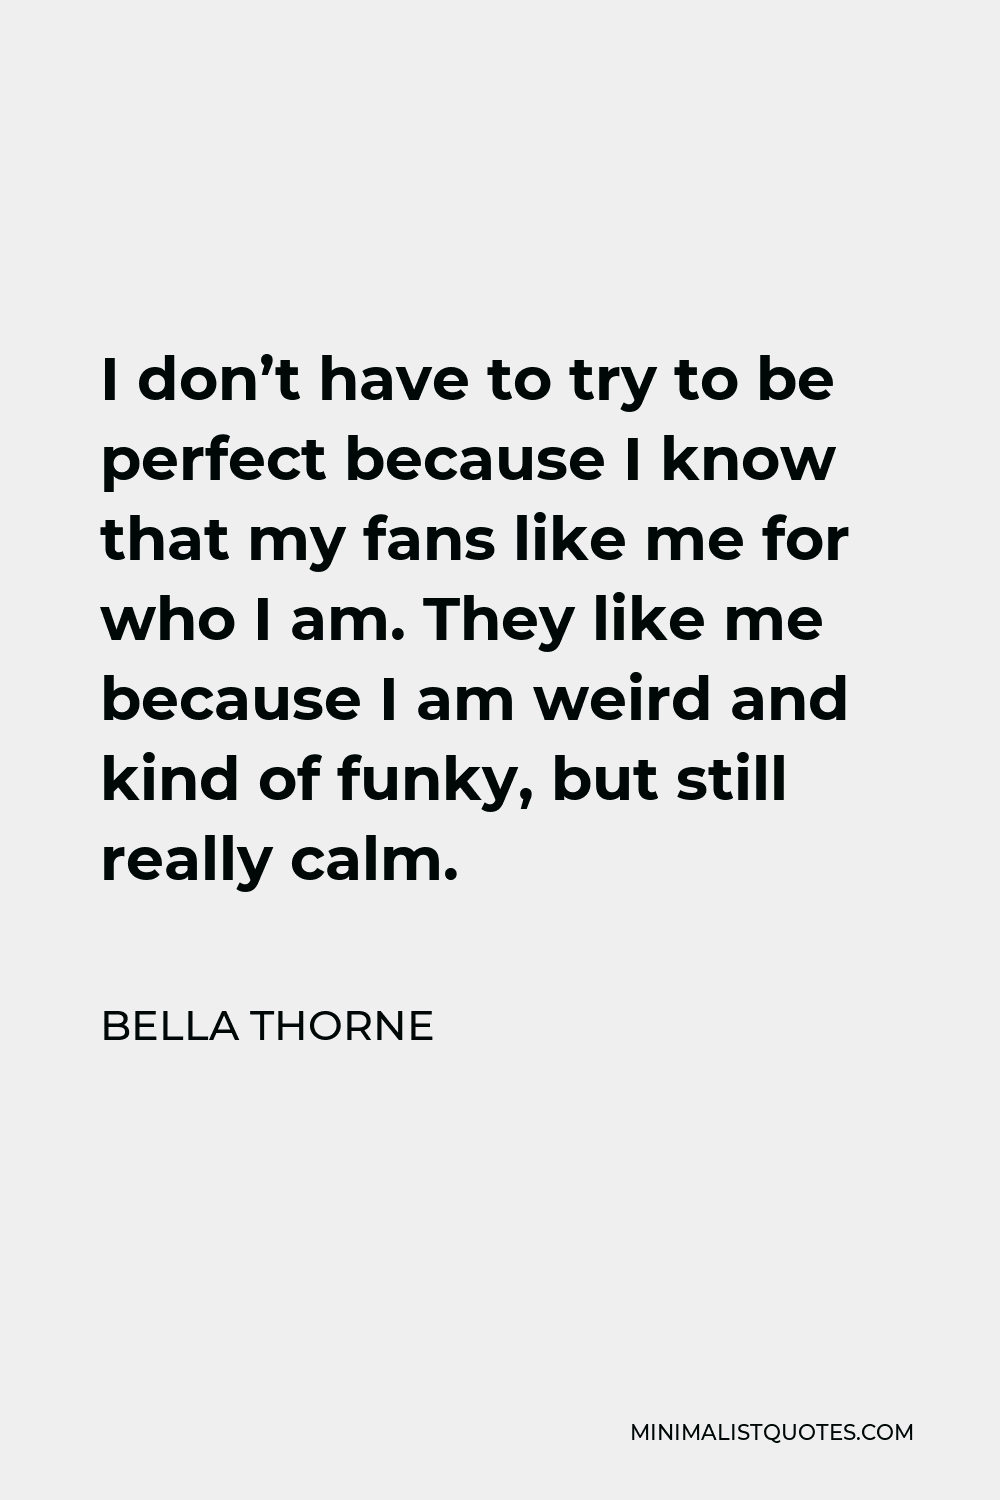 Bella Thorne Quote - I don’t have to try to be perfect because I know that my fans like me for who I am. They like me because I am weird and kind of funky, but still really calm.